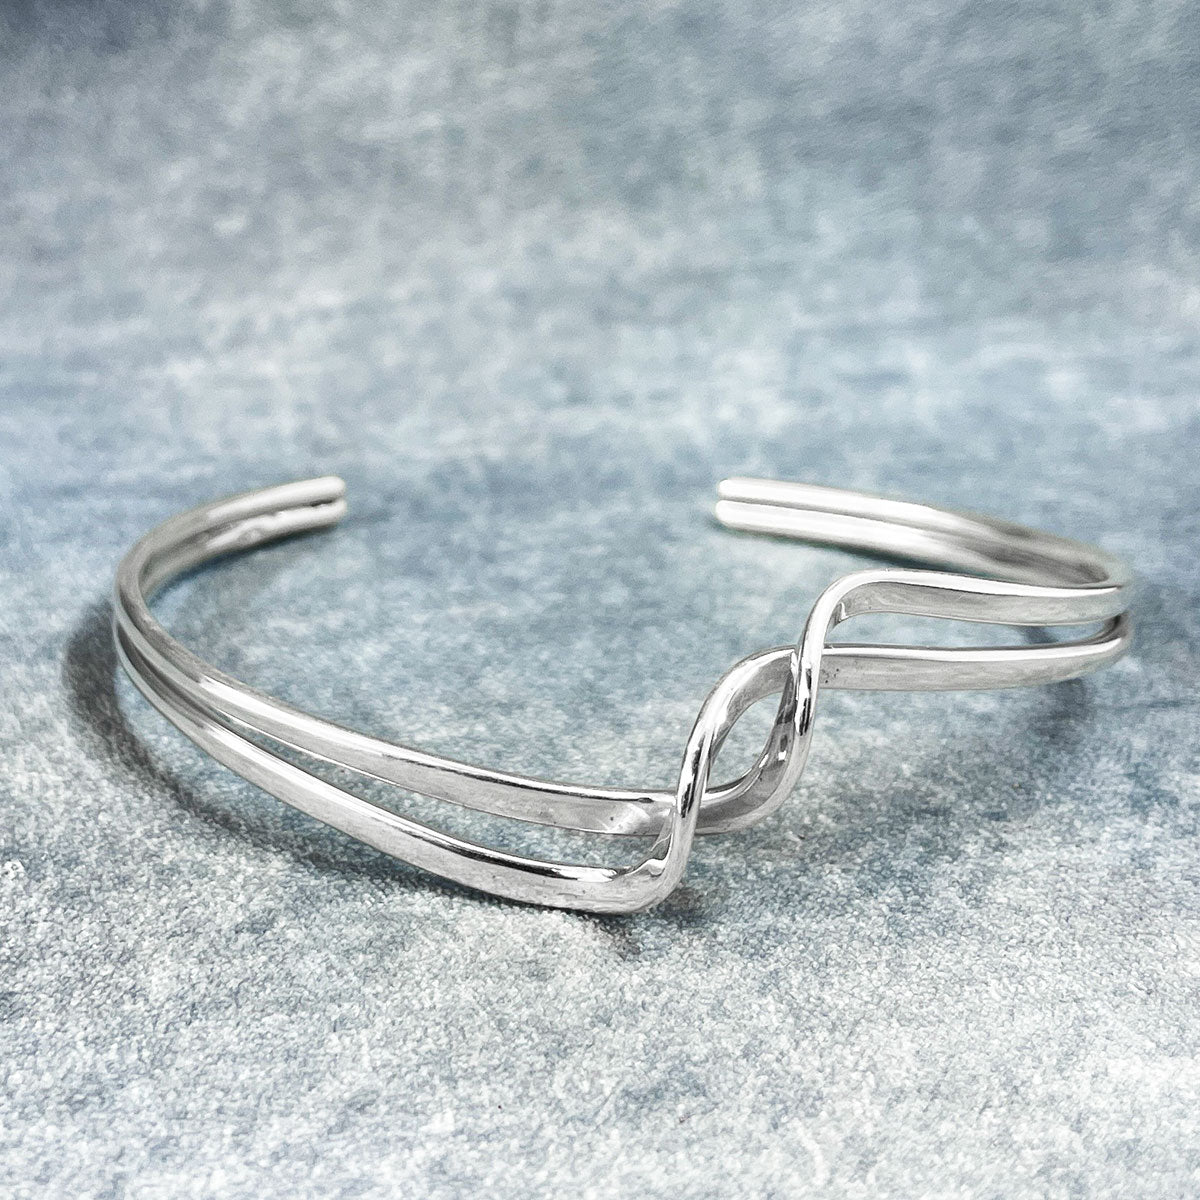 Uisce - Soft Double Wave With Crest Cuff Silver Bracelet Curated and designed by Emilio Sotelo Jewelry for Croi Kinsale Jewellery in Kinsale West Cork Ireland Europe. Find exceptional handmade silver and gold jewellery at affordable prices for birthday gifts and Christmas presents. Handcrafted Silver jewelry. Find the best affordable jewellery